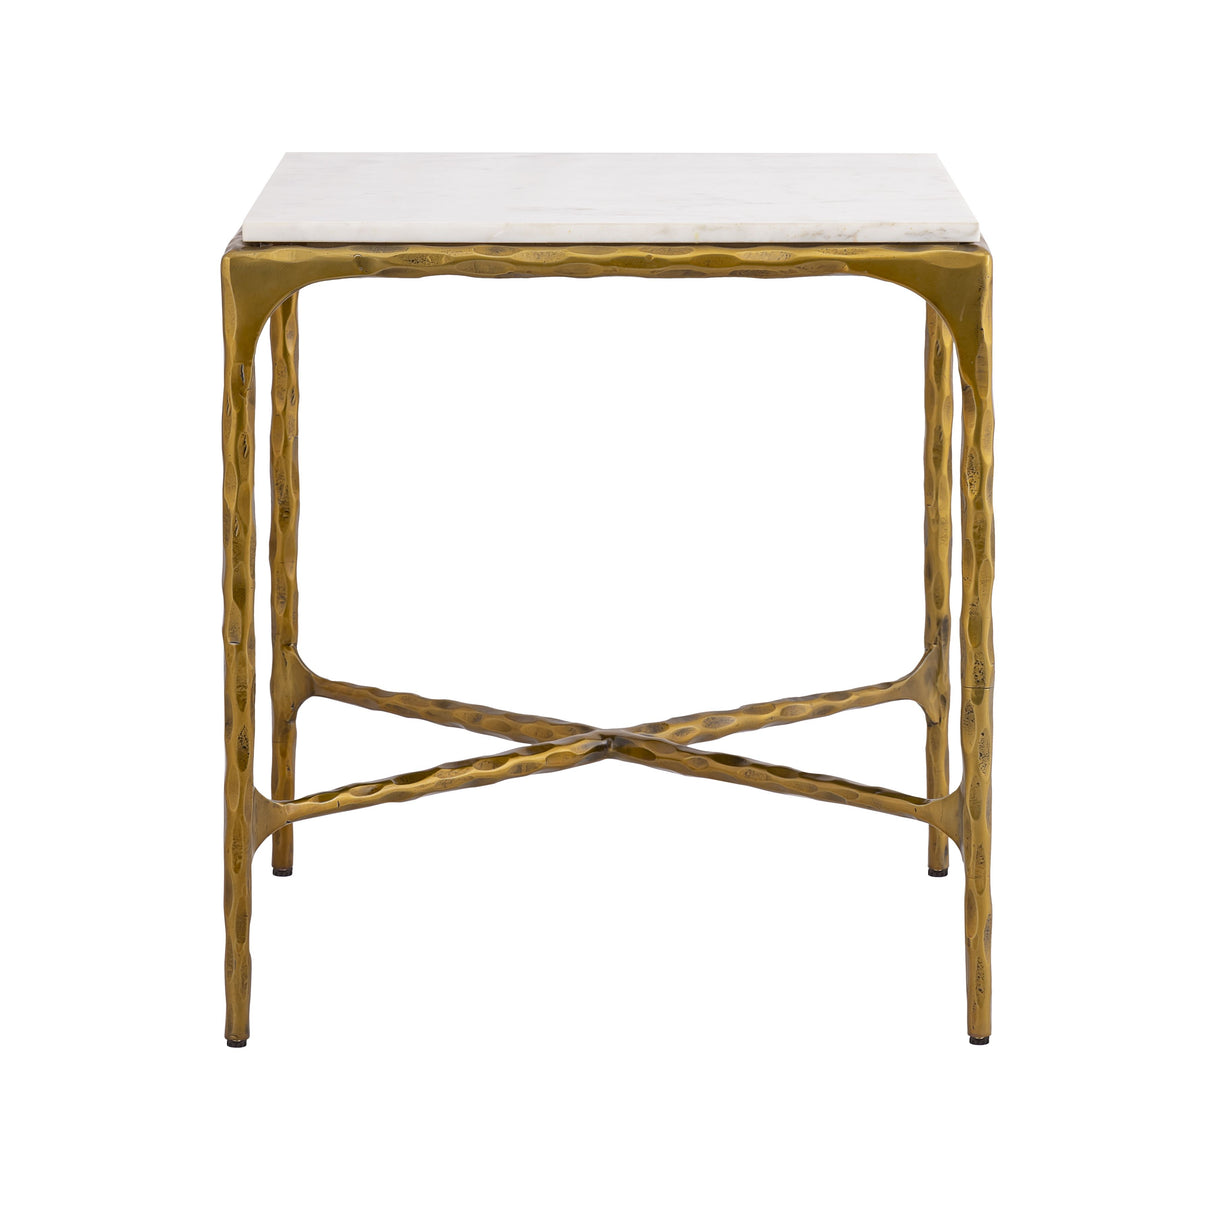 Elk H0895-10644 Seville Forged Accent Table - Antique Brass